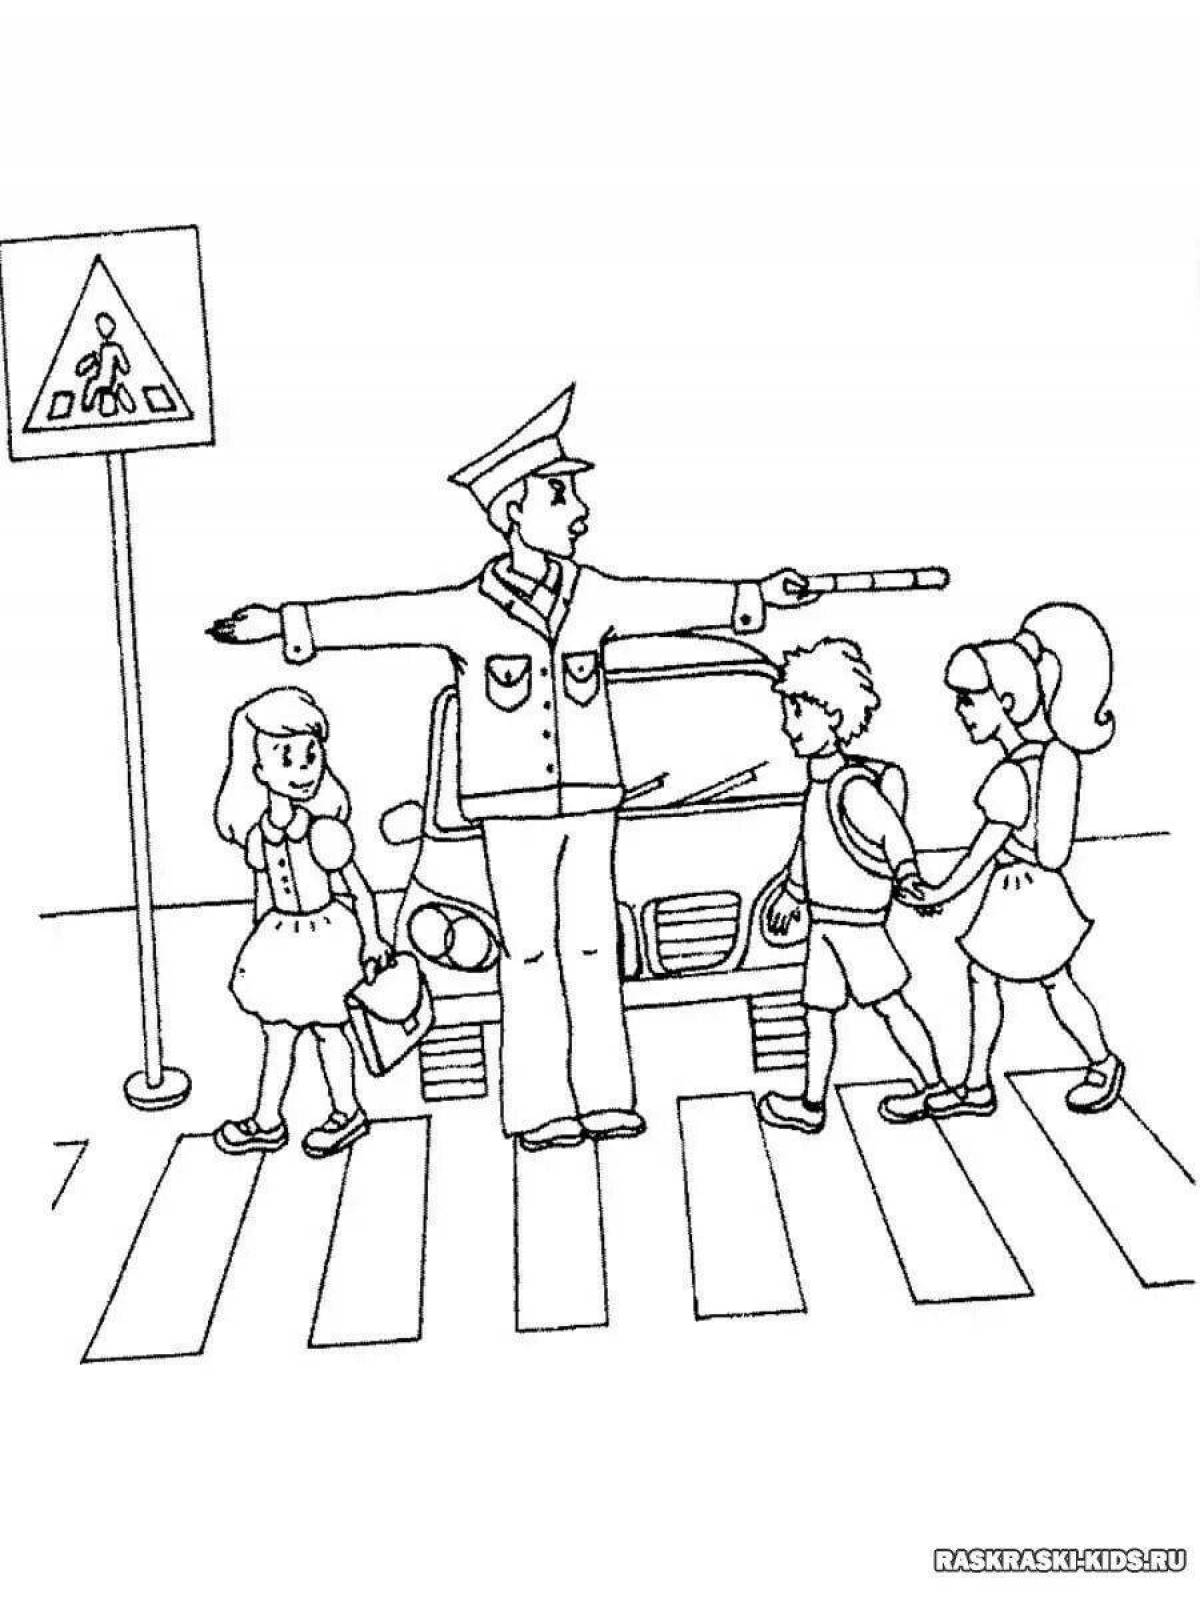 Drawings for kids traffic rules for kids #14